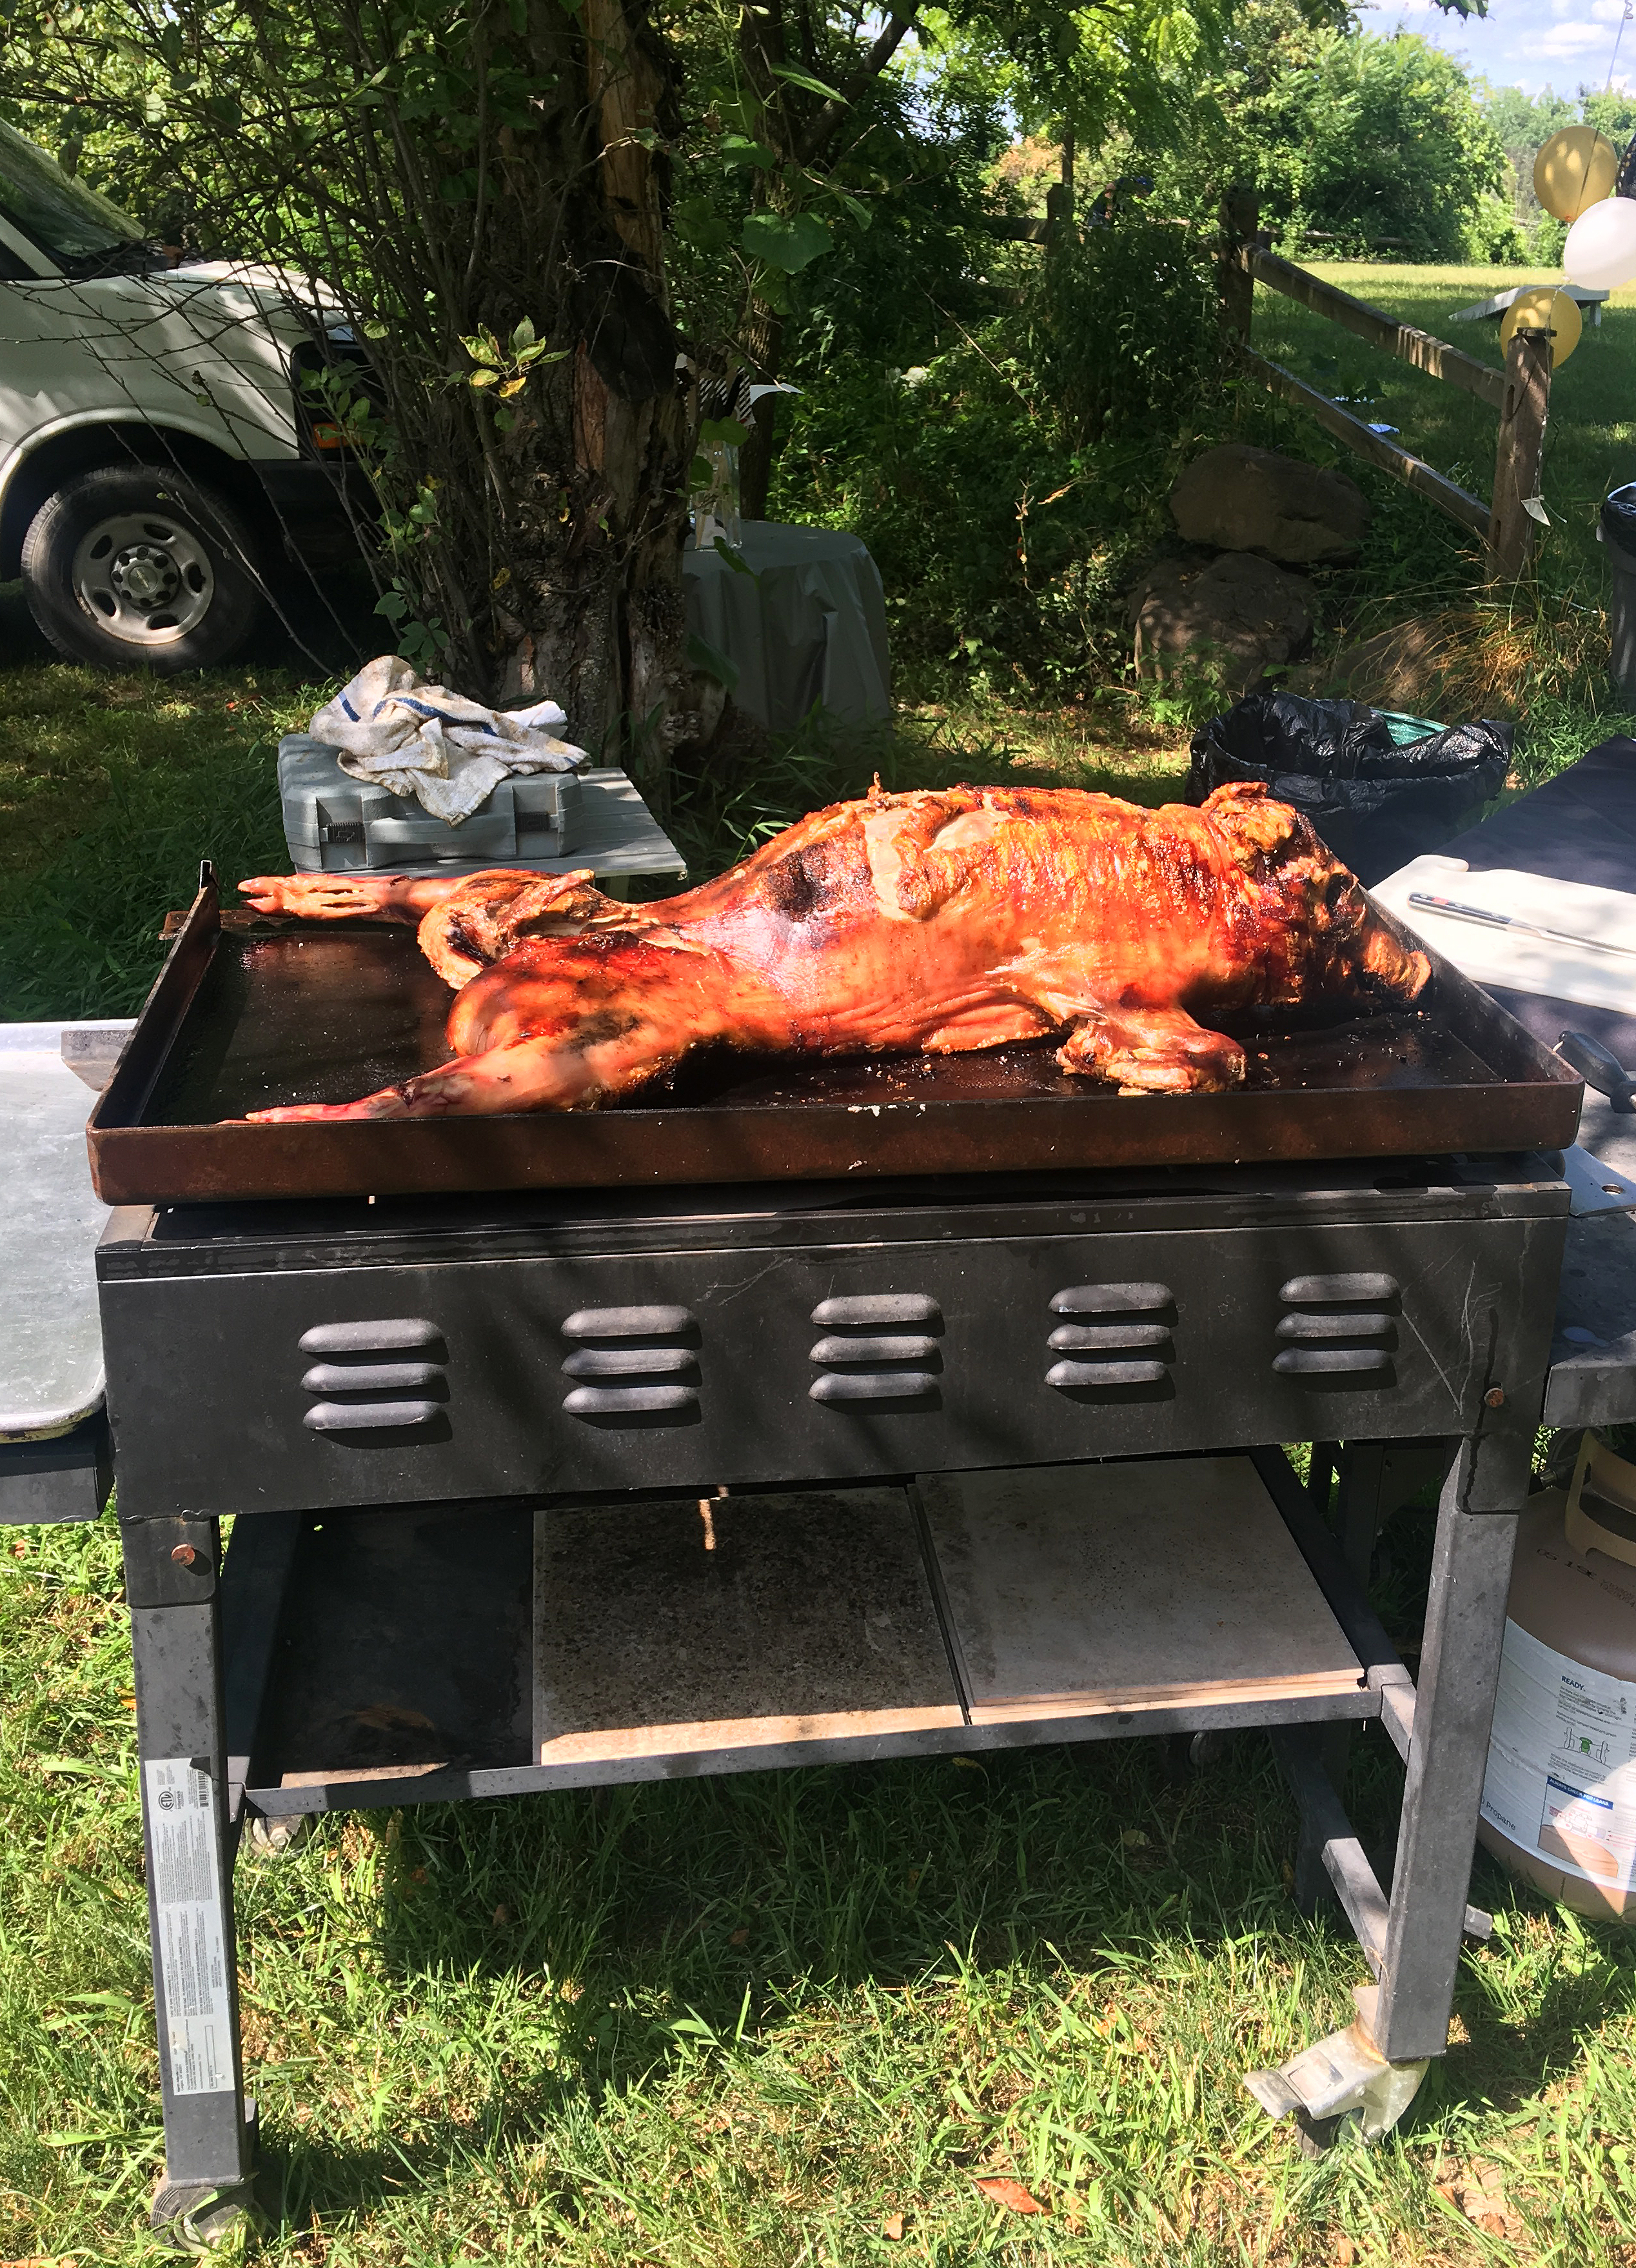 Pig on Grill